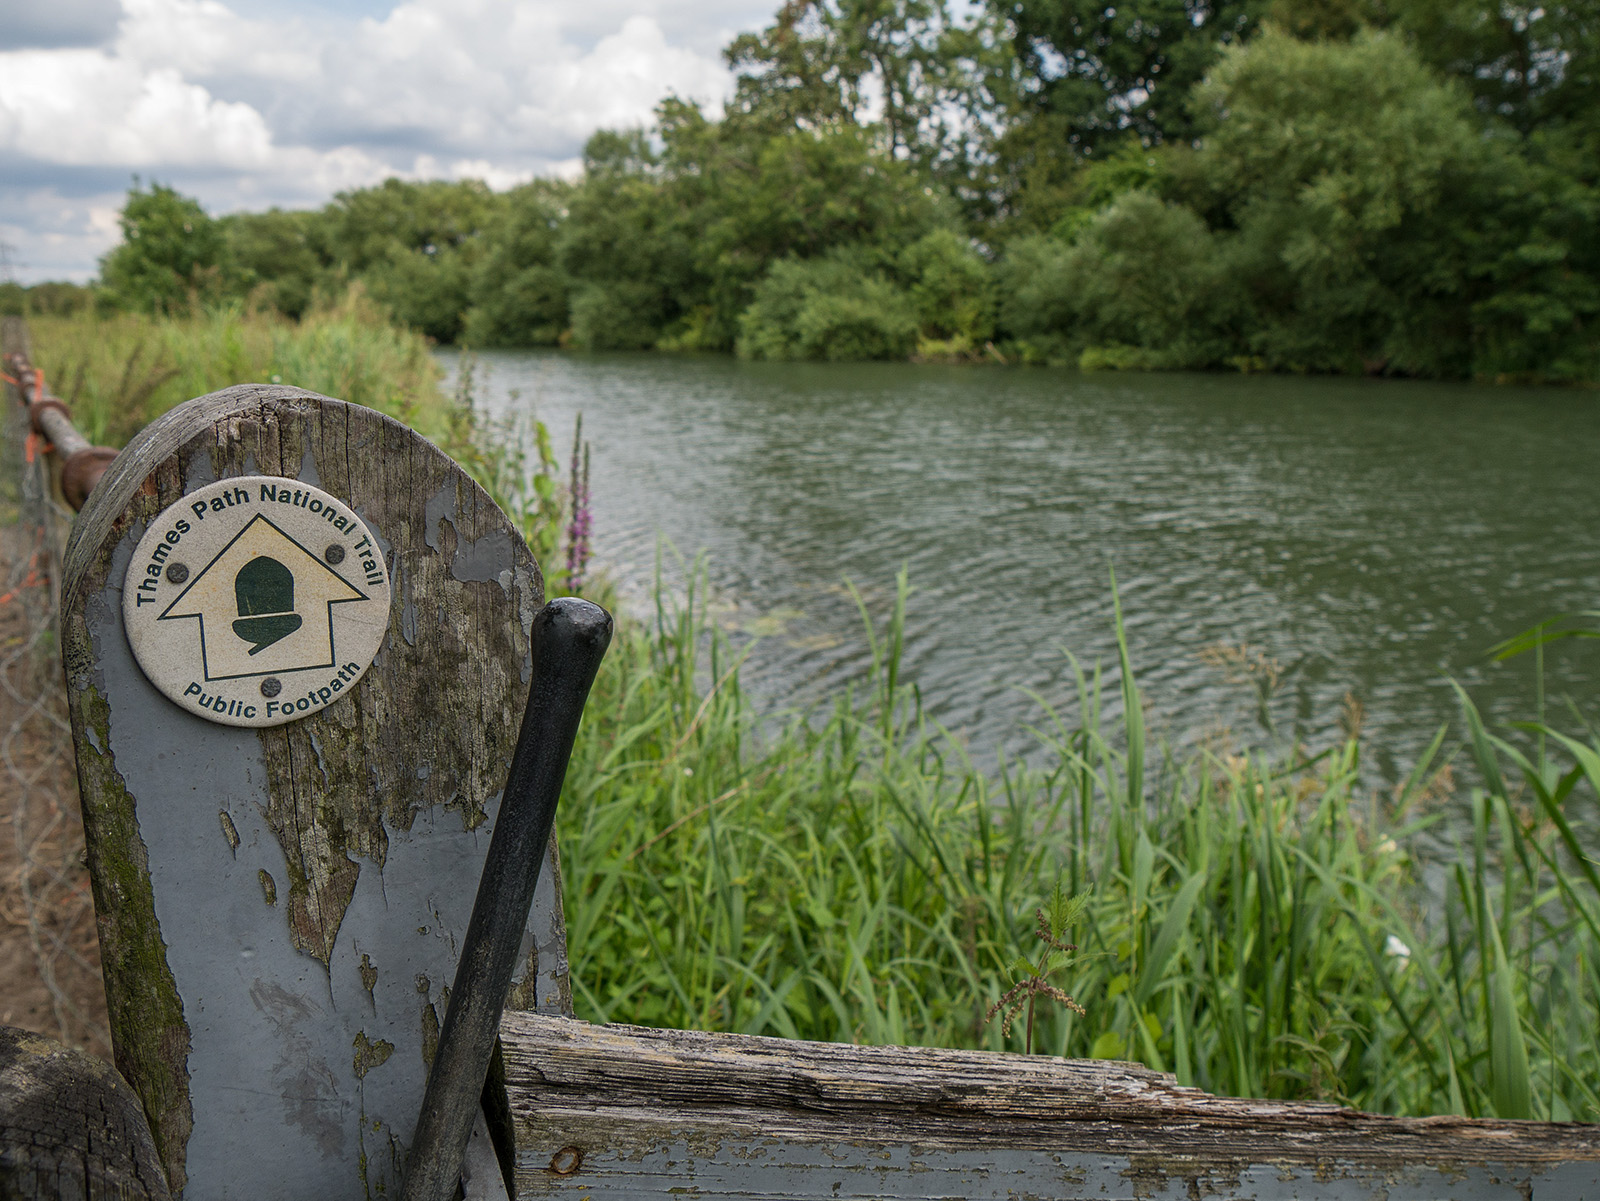 Looking back for a while - classic Thames Path marker